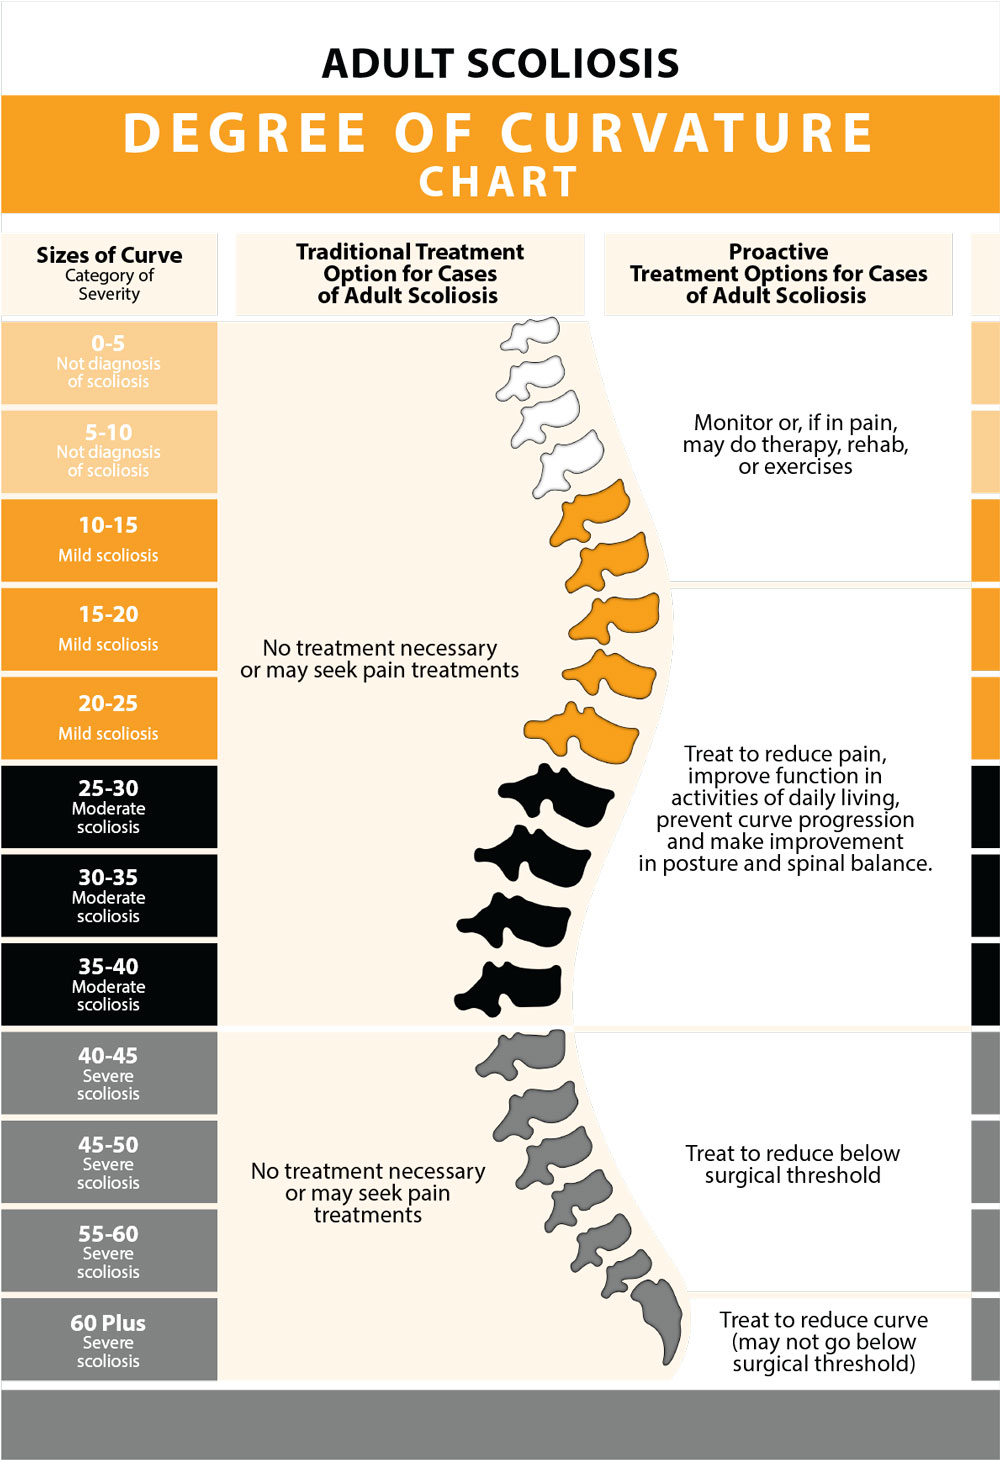 Exploring The Scoliosis Degrees Of Curvature Chart